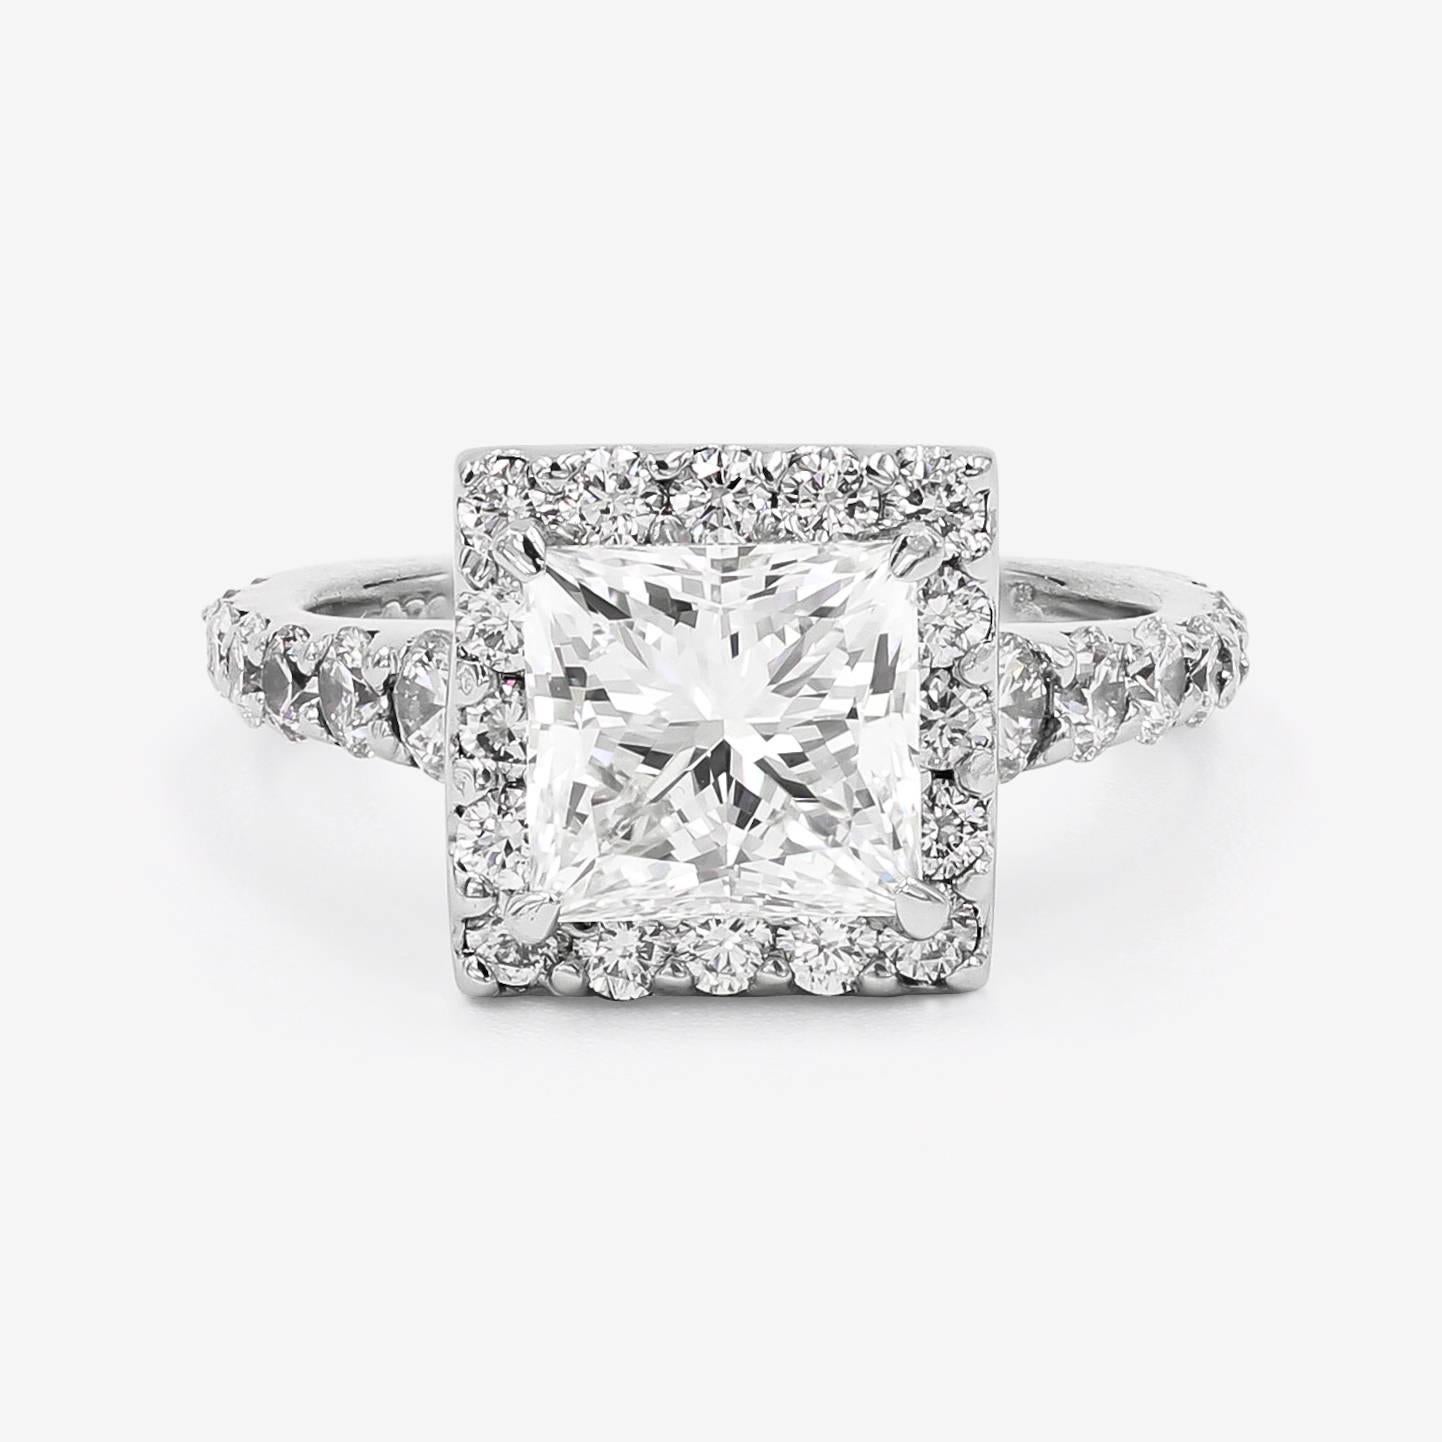 This classic platinum ring contains a center 2.19cts. princess cut center H color and VVS2 clarity, and 32 ideal cut round diamonds= 1.14cts. t.w. set in a halo style around the center and down the sides of the shank. (accent diamonds are